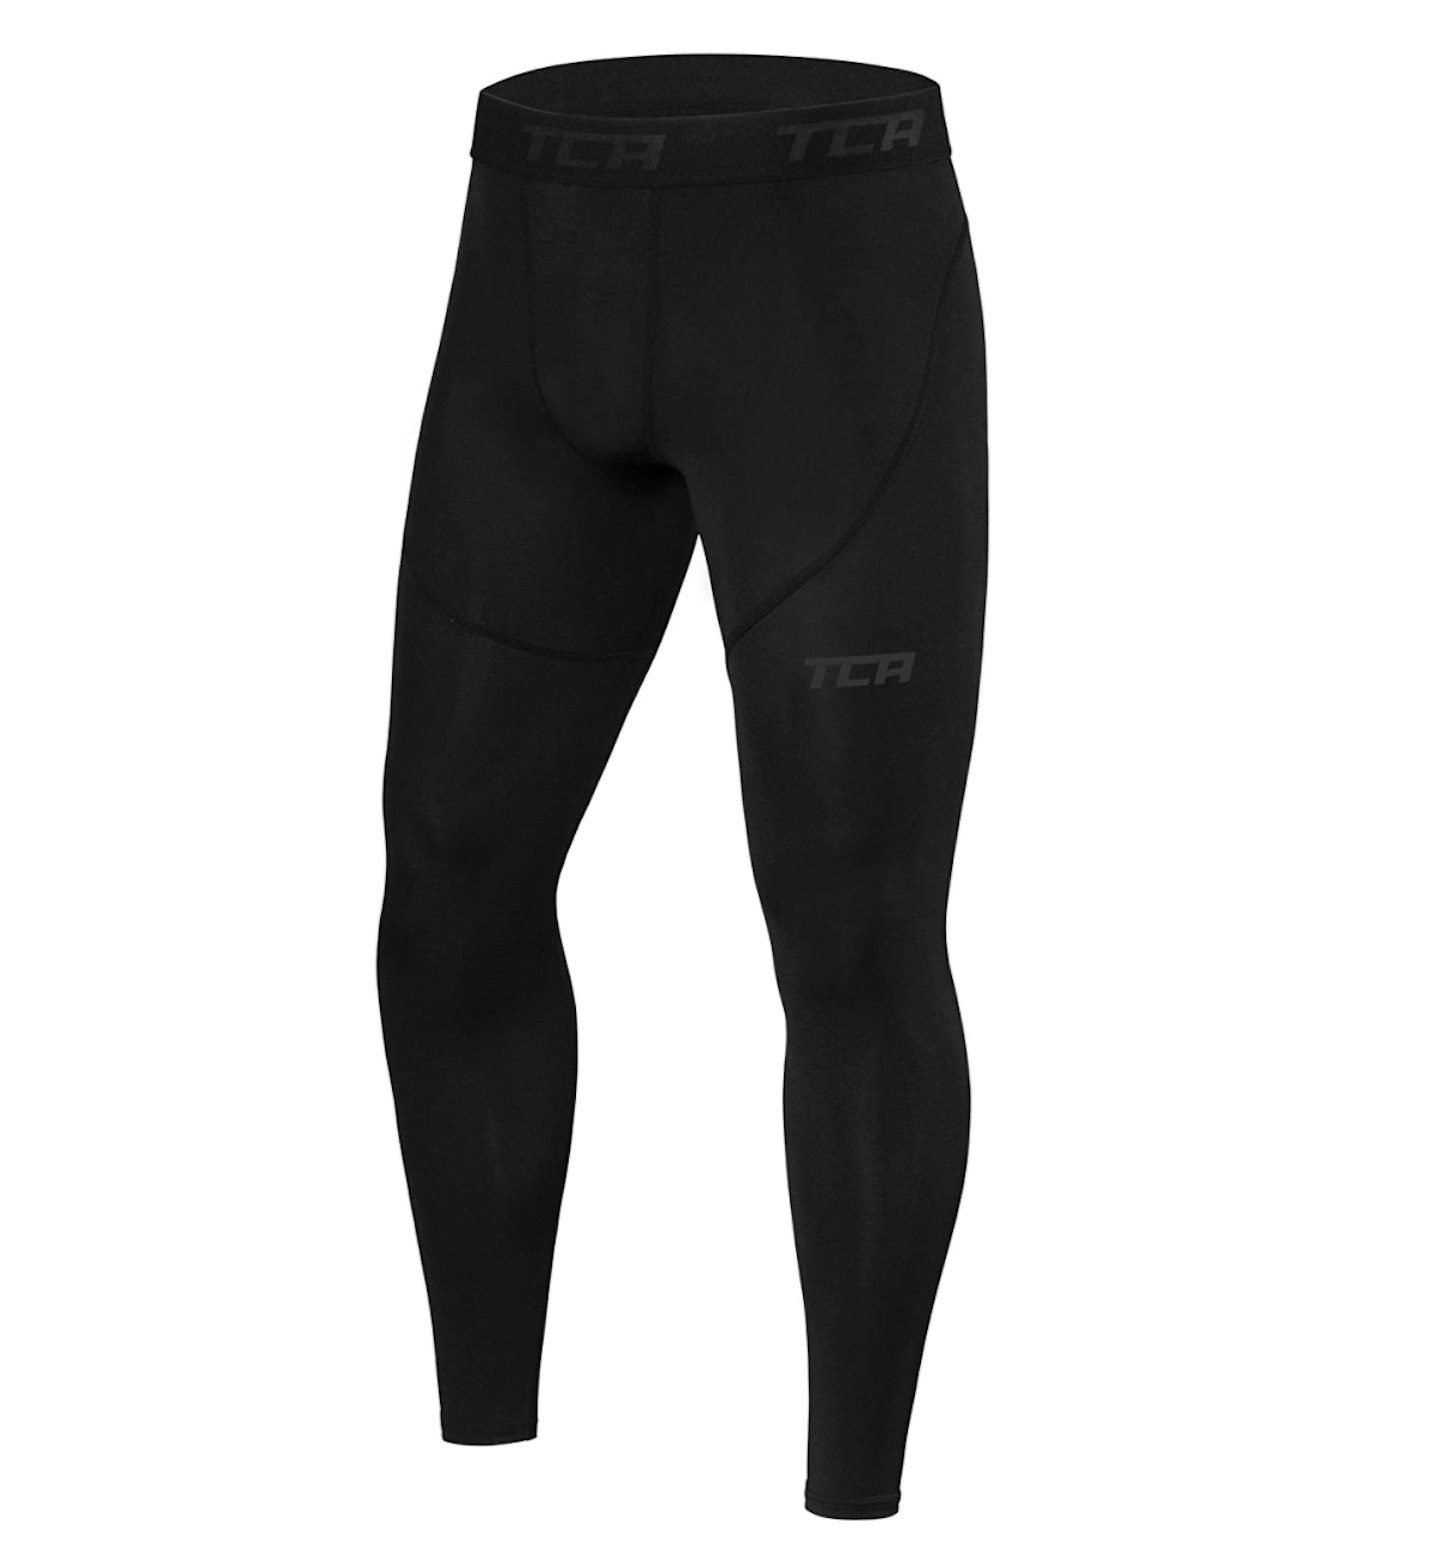 Best Men's Running Tights For Comfort and Performance